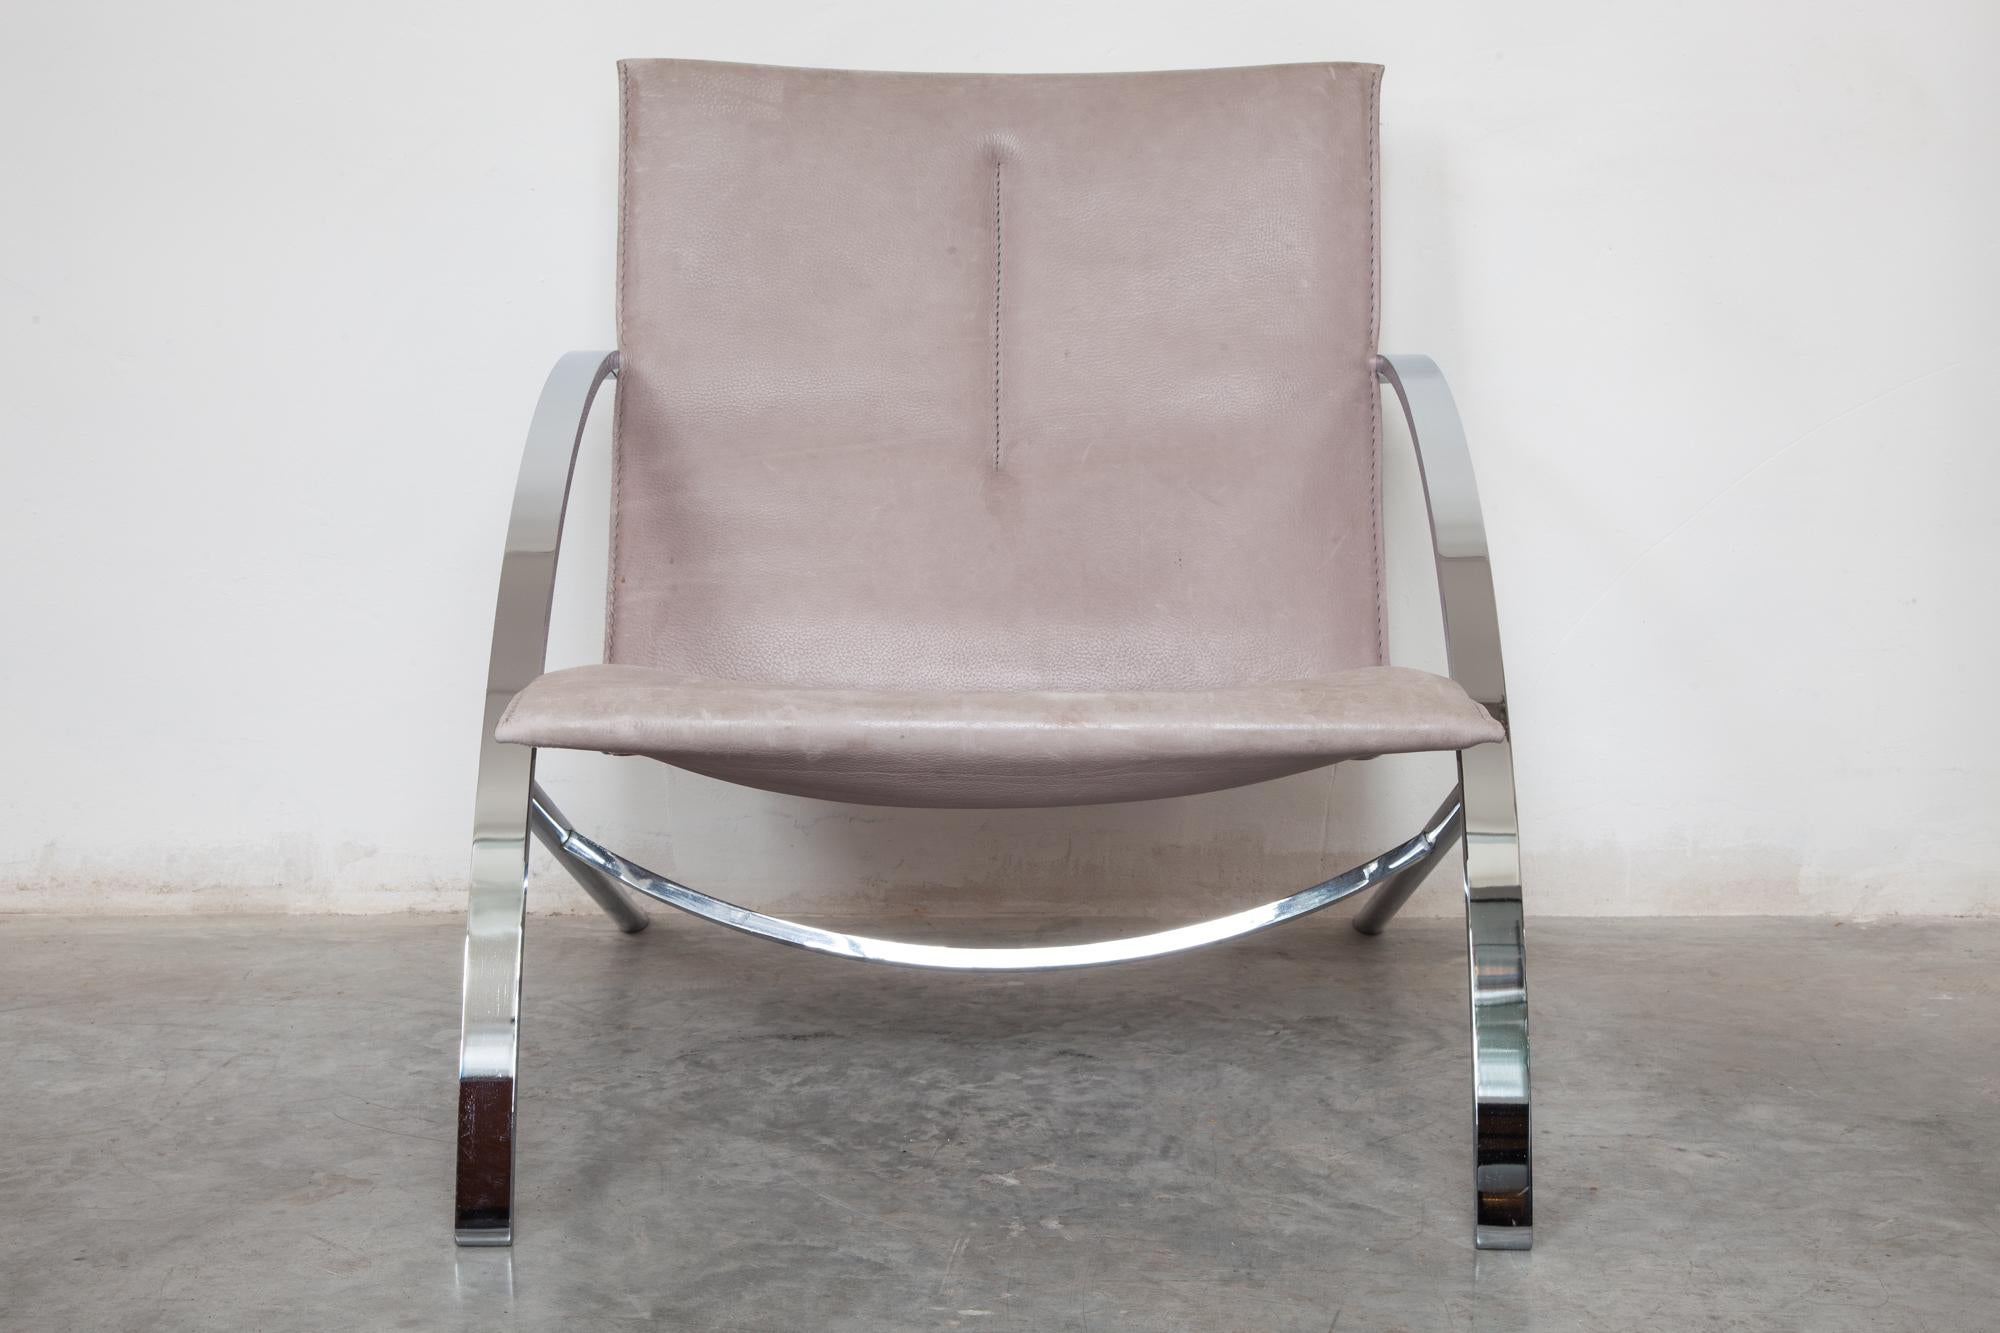 Leather loungers, Switzerland
Vintage leather loungers by Paul Tuttle, Model Arco, 1976.
Switzerland. Polished chrome-based with beautiful arched armrests. Grey leather sling seat with aged patina. No rips or tears.

Dimensions: 68 W x 75 H x 86 D